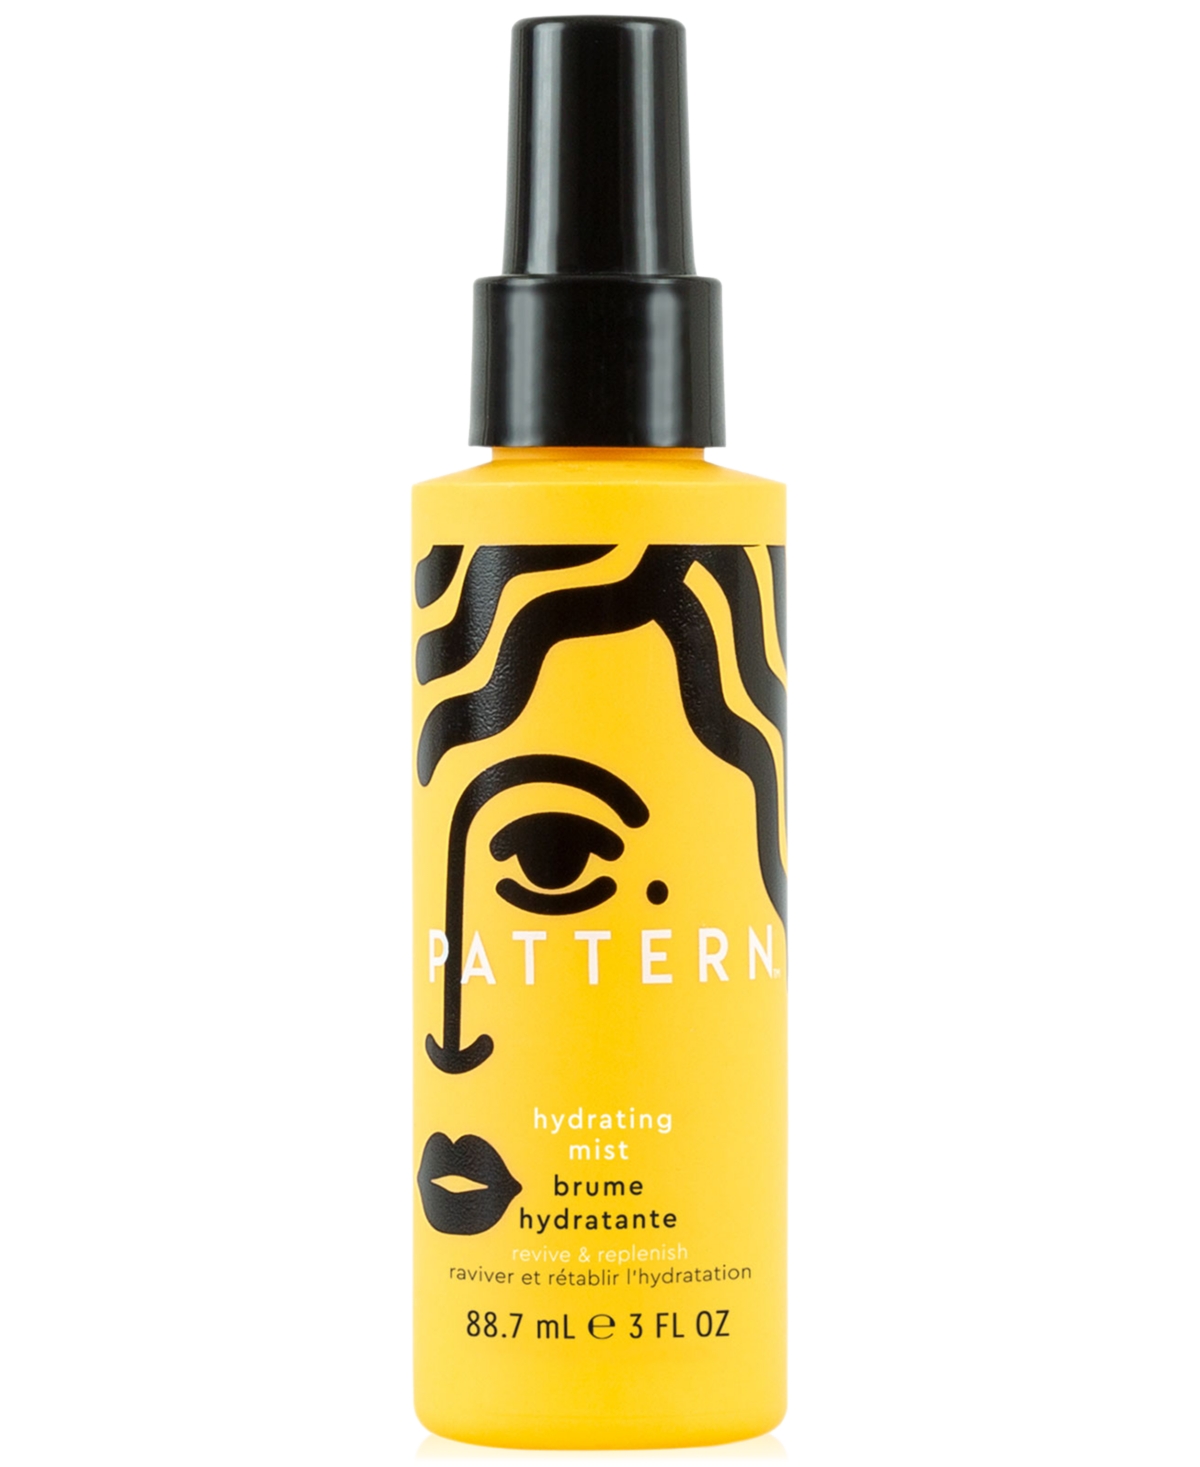 Pattern Beauty By Tracee Ellis Ross Hydrating Mist, 3 Oz. In No Color